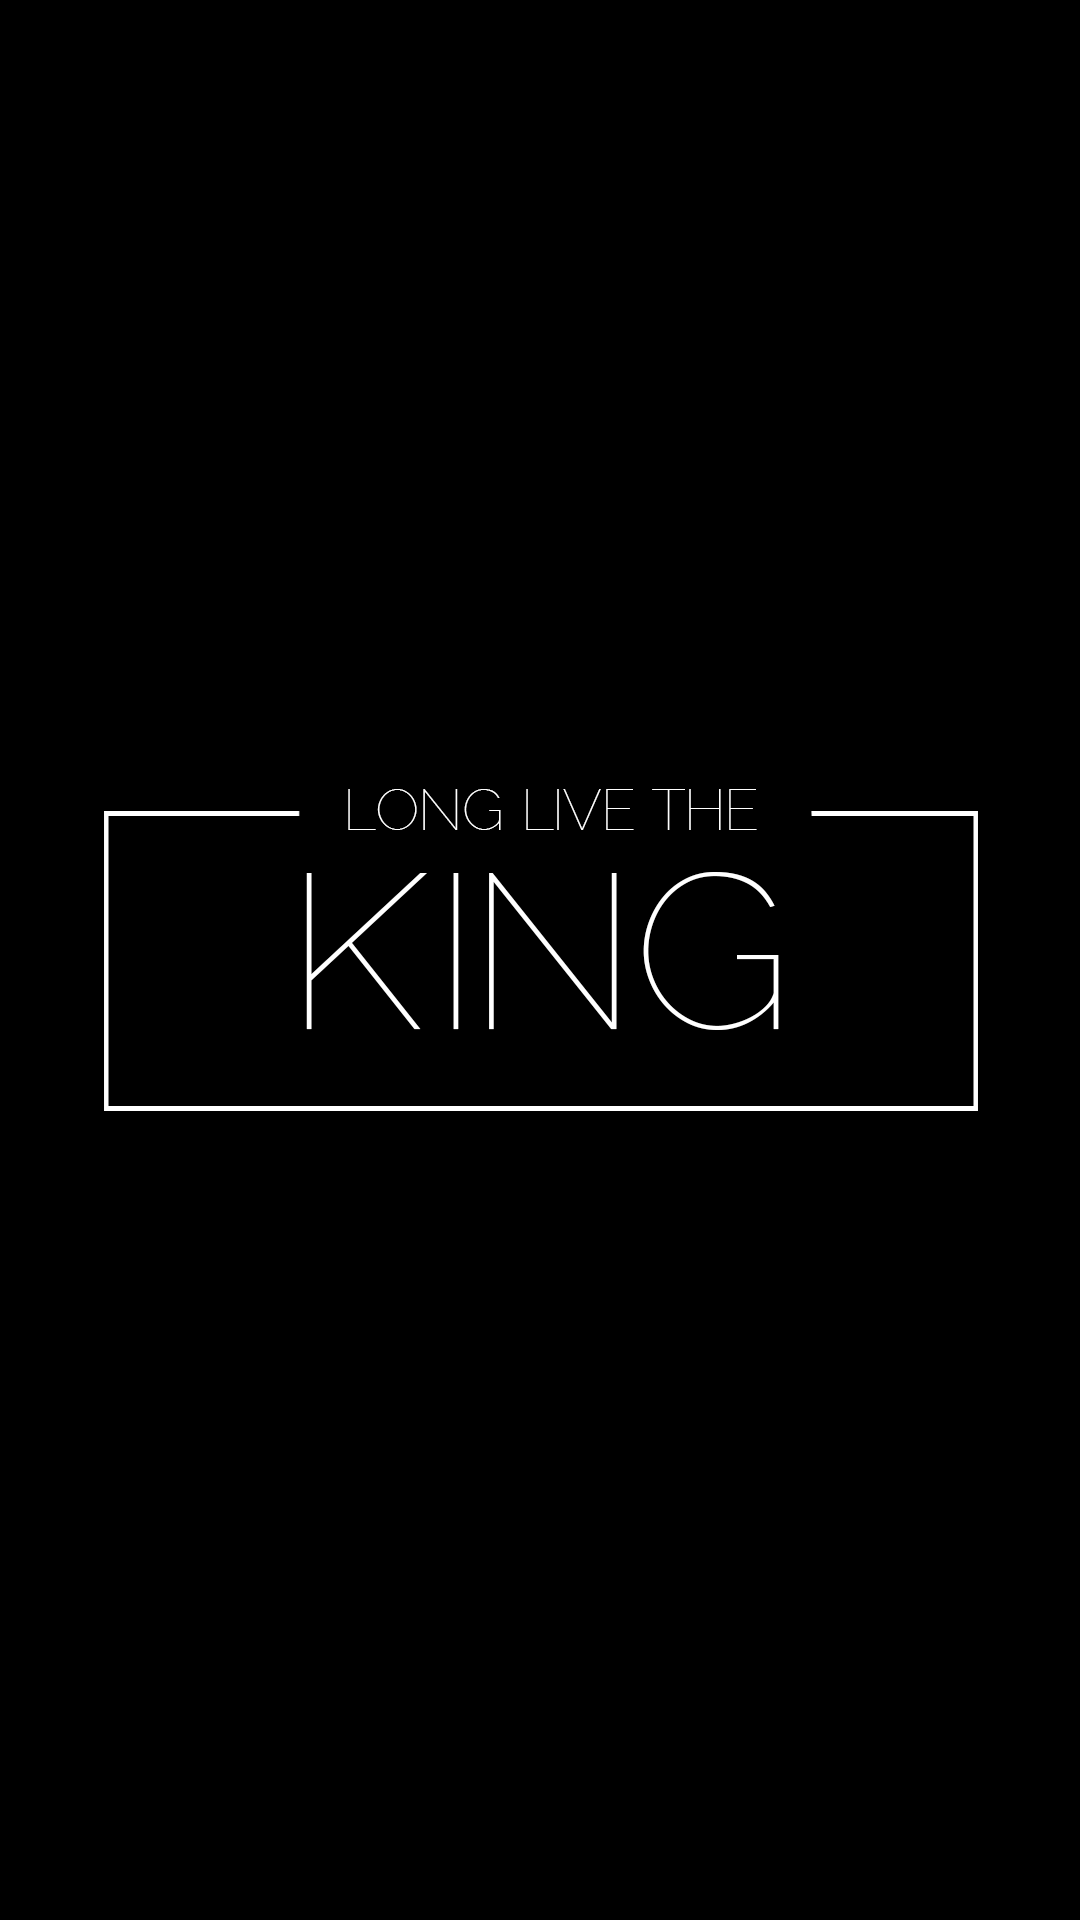 Long Live the King iPhone Wallpaper. Cool wallpaper for phones